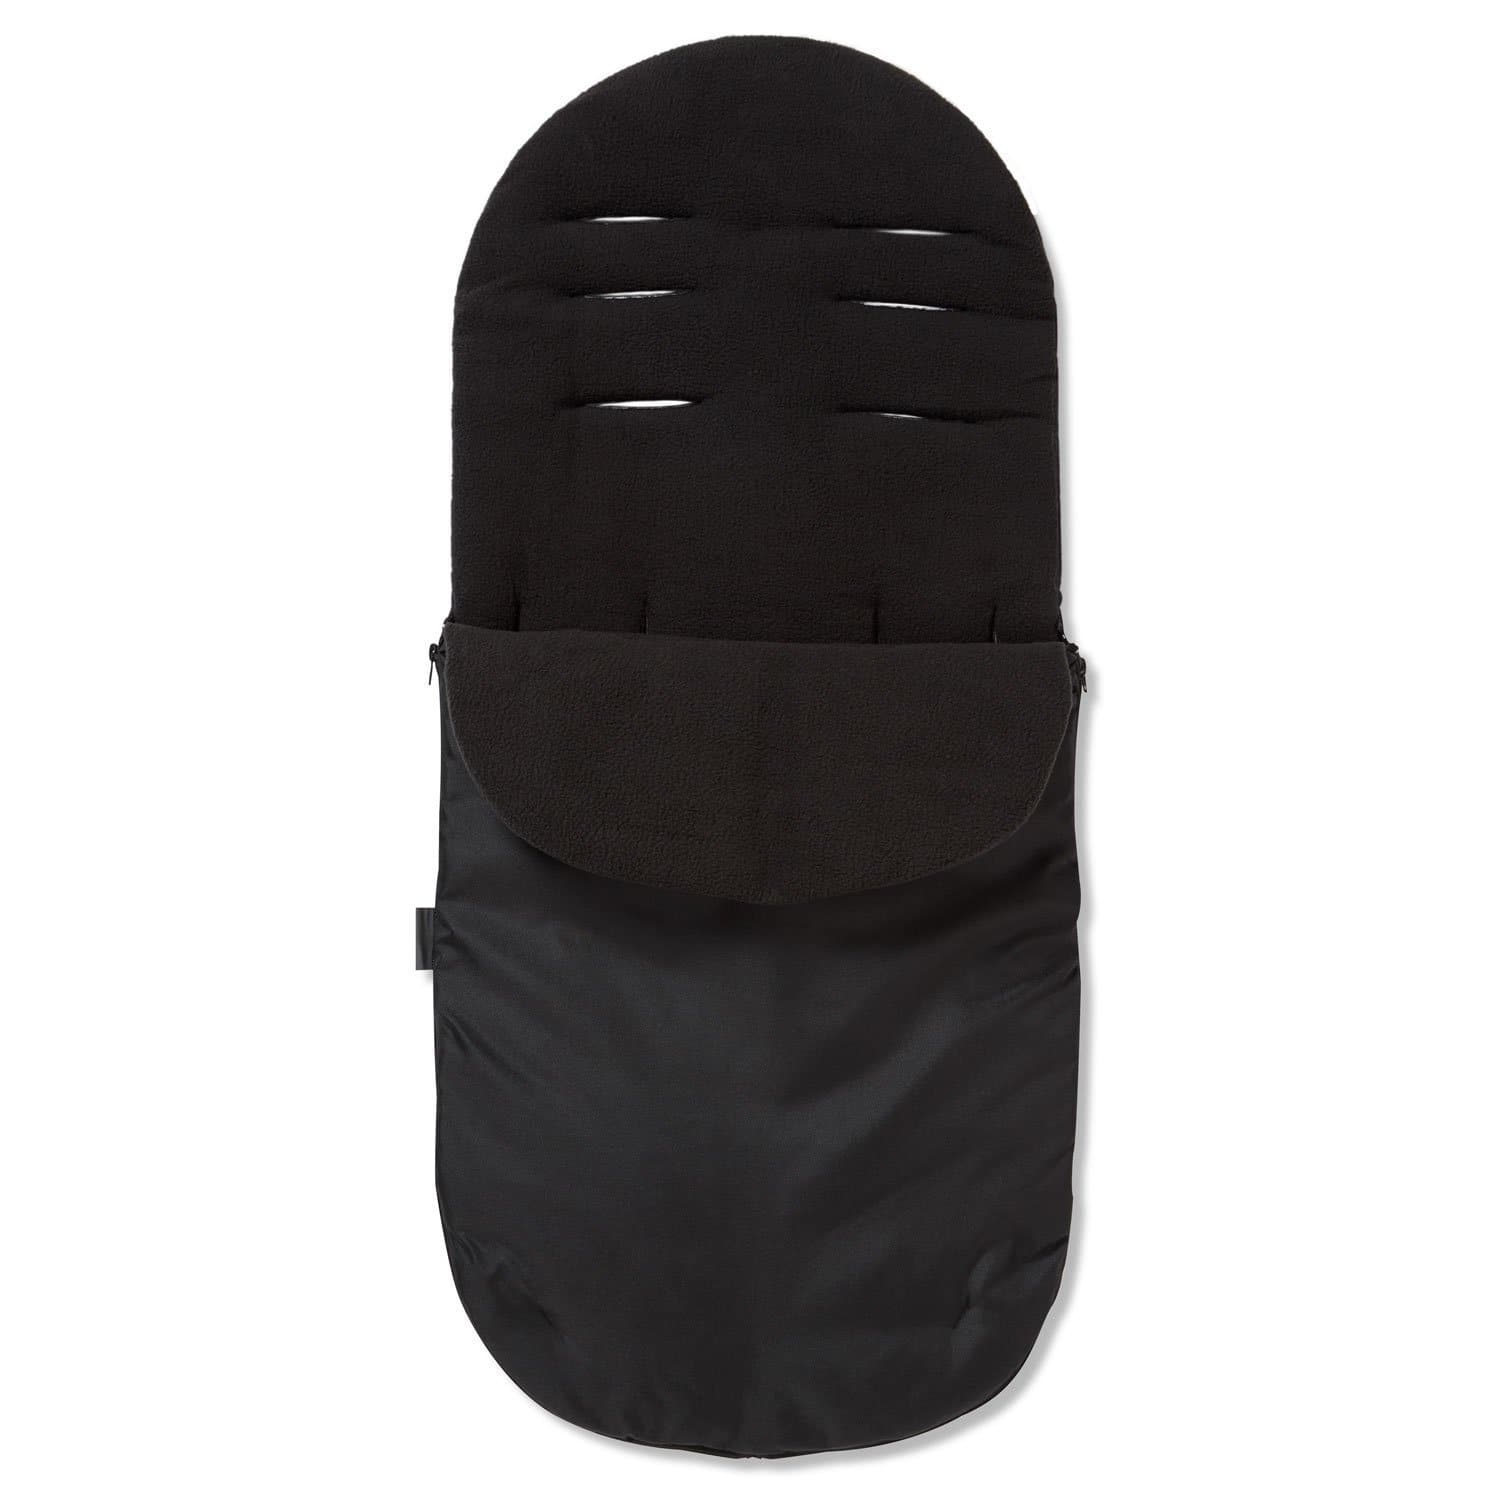 Footmuff / Cosy Toes Compatible with Firstwheels - Black / Fits All Models | For Your Little One